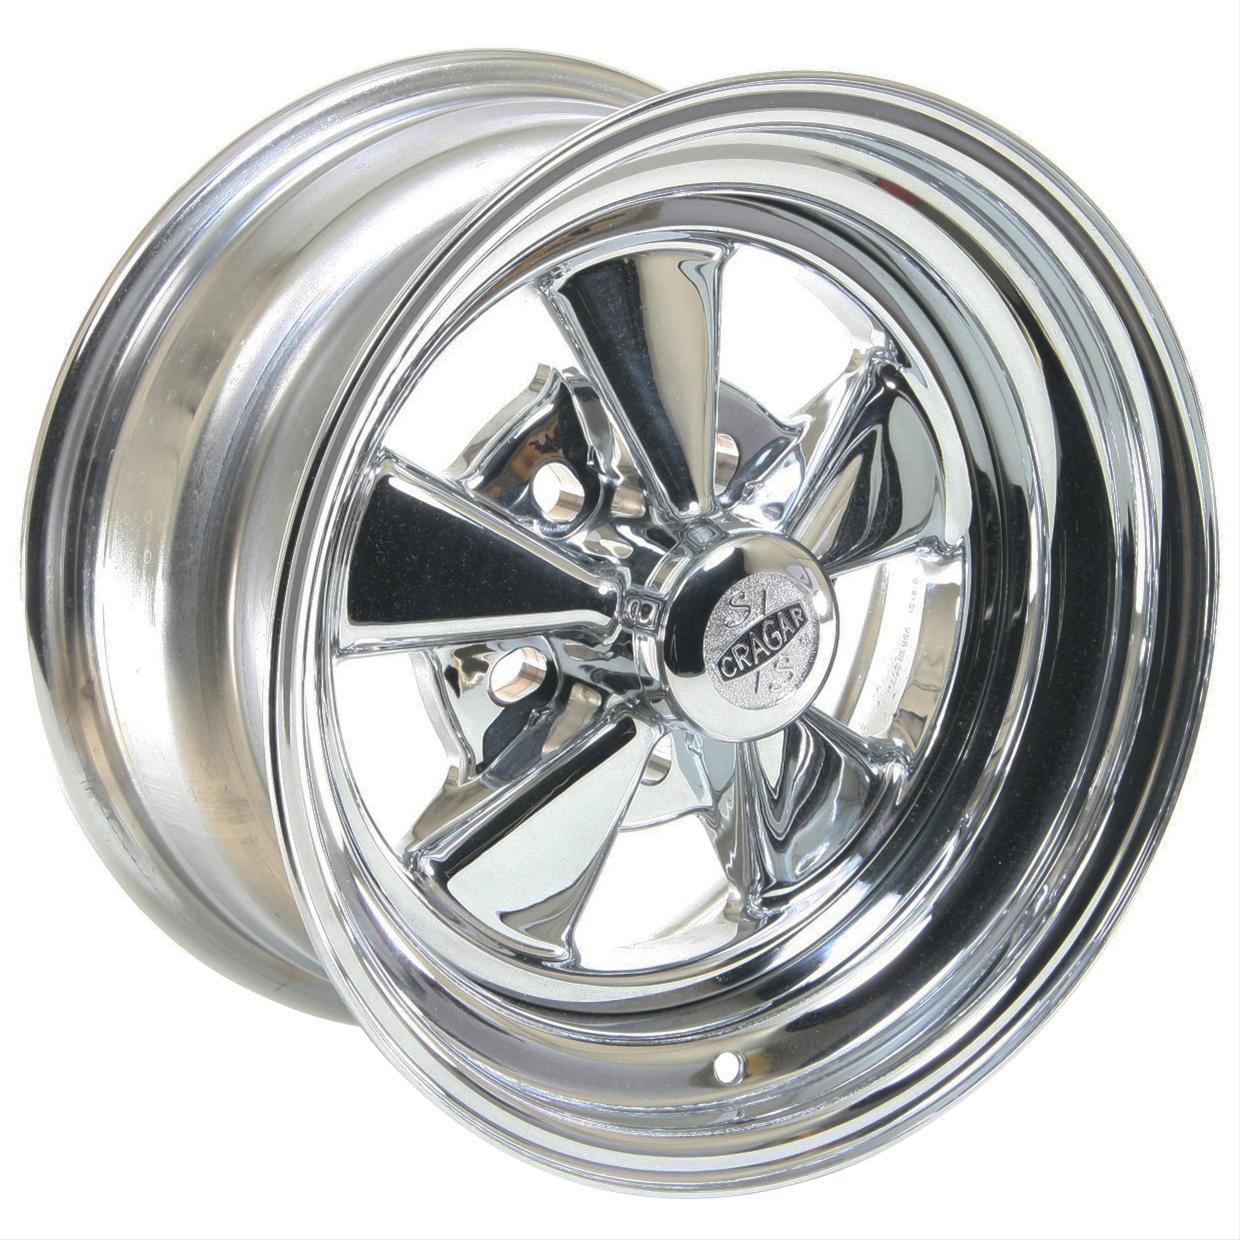 SS Rims Logo - Buyer's Guide: Our 10 Favorite Cragar SS Wheels - OnAllCylinders